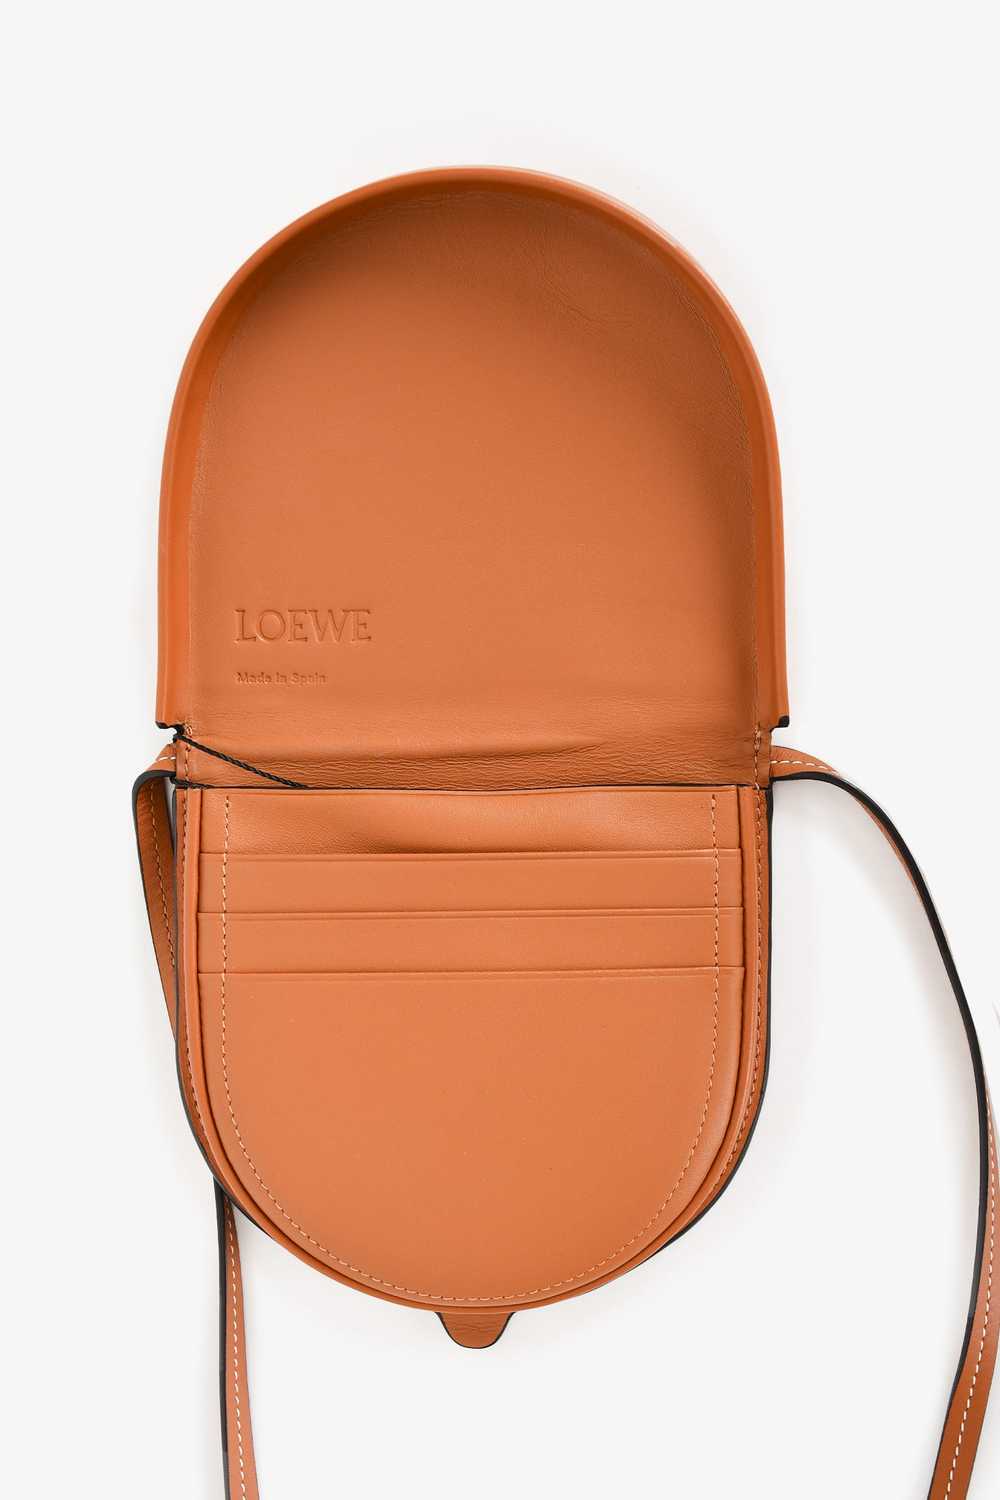 Loewe Brown Leather Small 'Heel' Crossbody Pouch - image 6